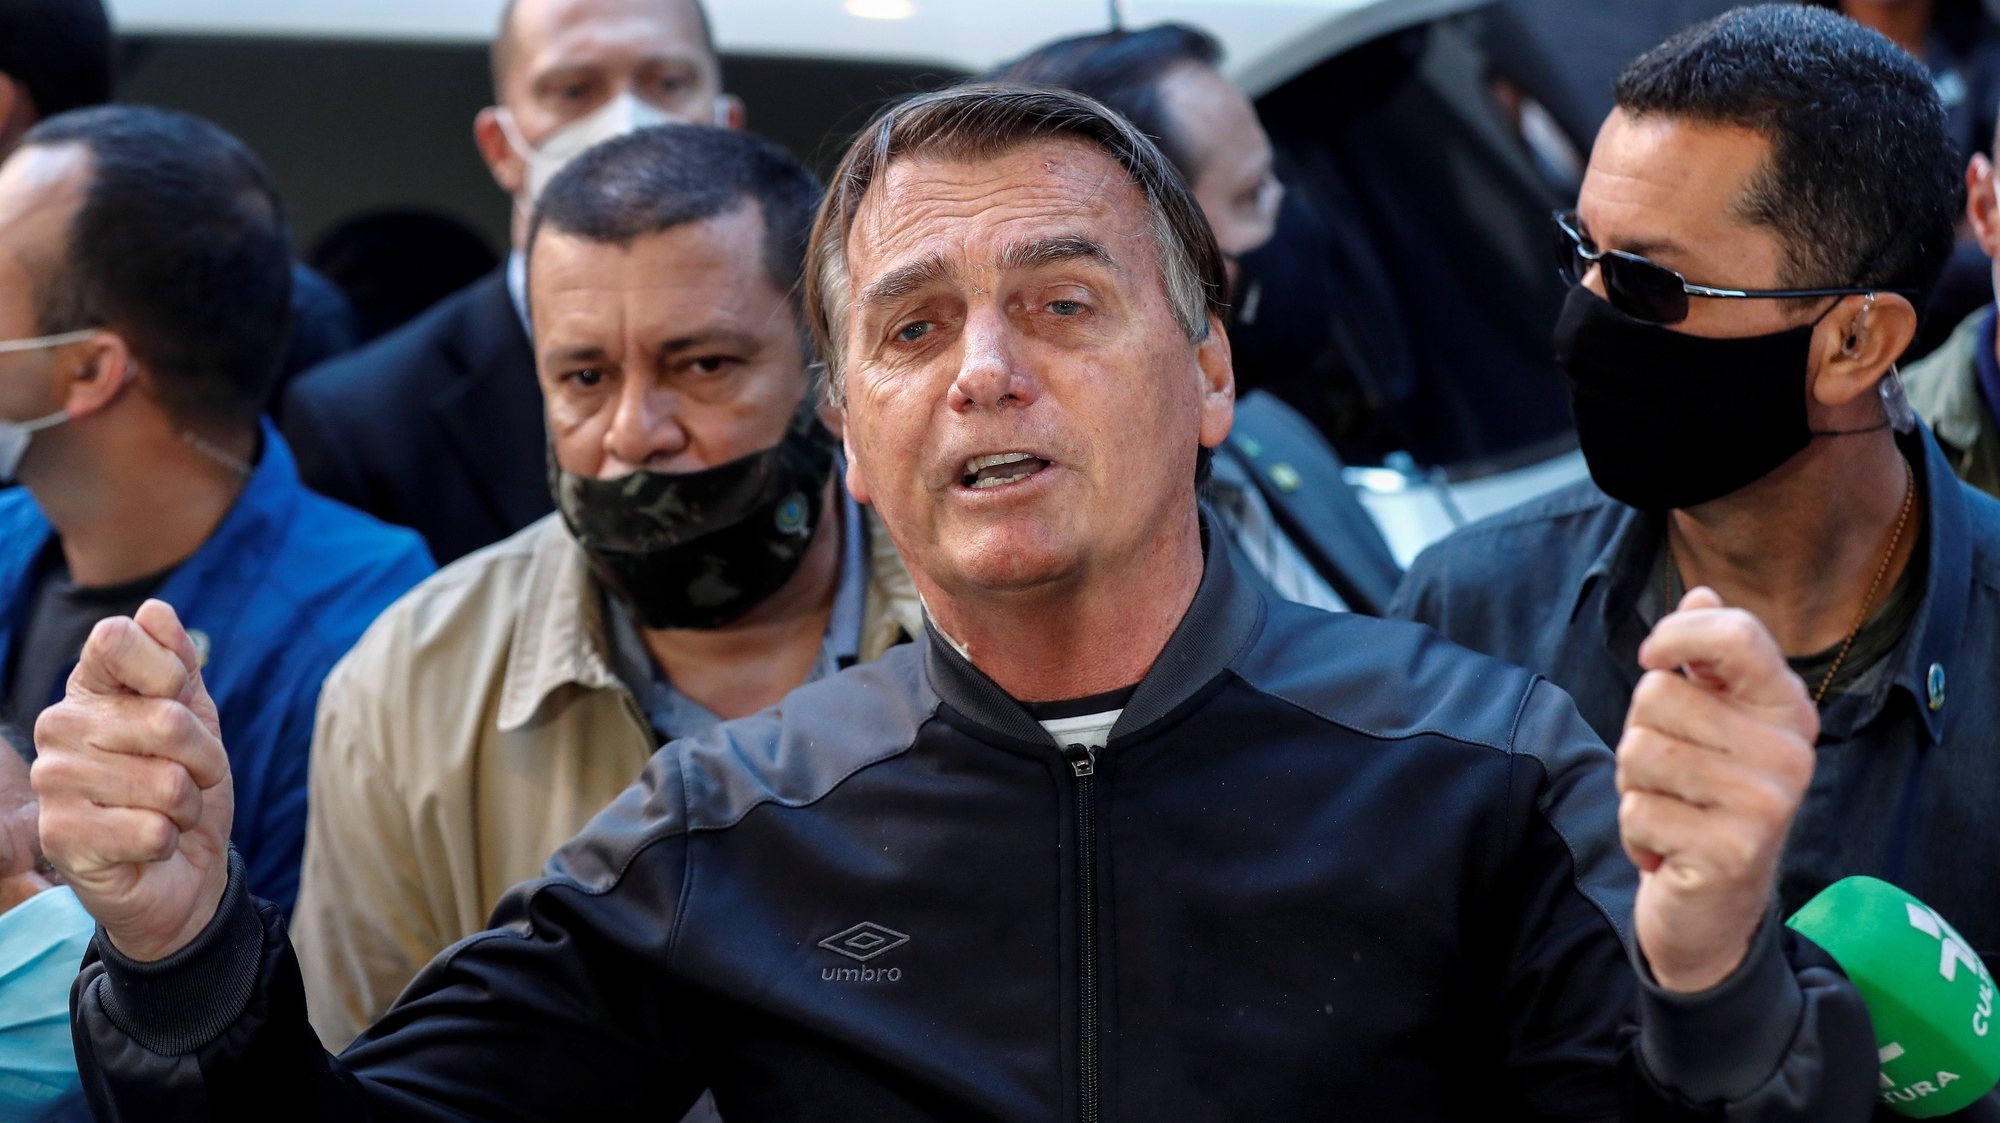 epa09351993 Brazilian President Jair Bolsonaro delivers remarks after he was discharged from Vila Nova Star Hospital, in Sao Paulo, Brazil, 18 July 2021. Bolsonaro was admitted to the Armed Forces Hospital in Brasilia on 14 July for chronic hiccups and abdominal pain and transferred to Sao Paulo the same day to treat an intestinal obstruction.  EPA/Sebastiao Moreira